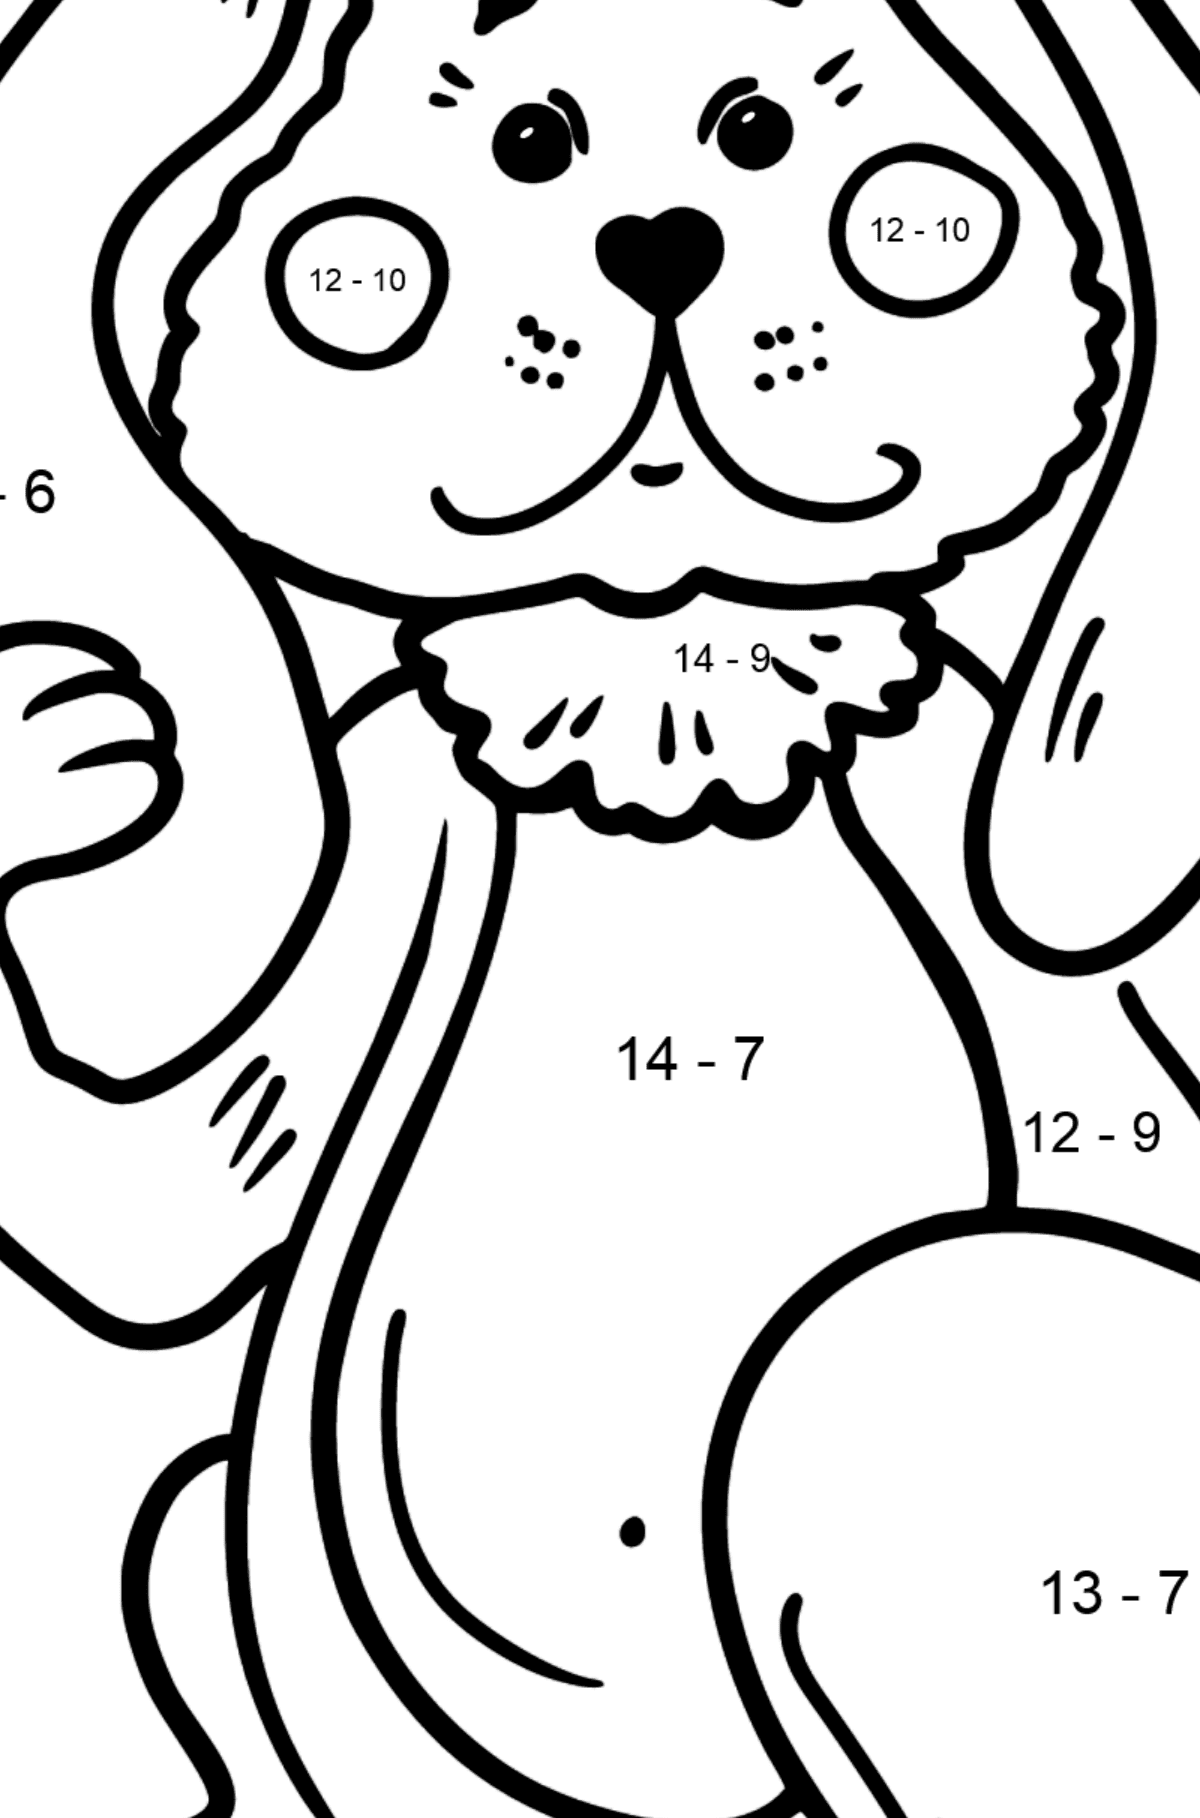 Sad Bunny coloring page - Math Coloring - Subtraction for Kids